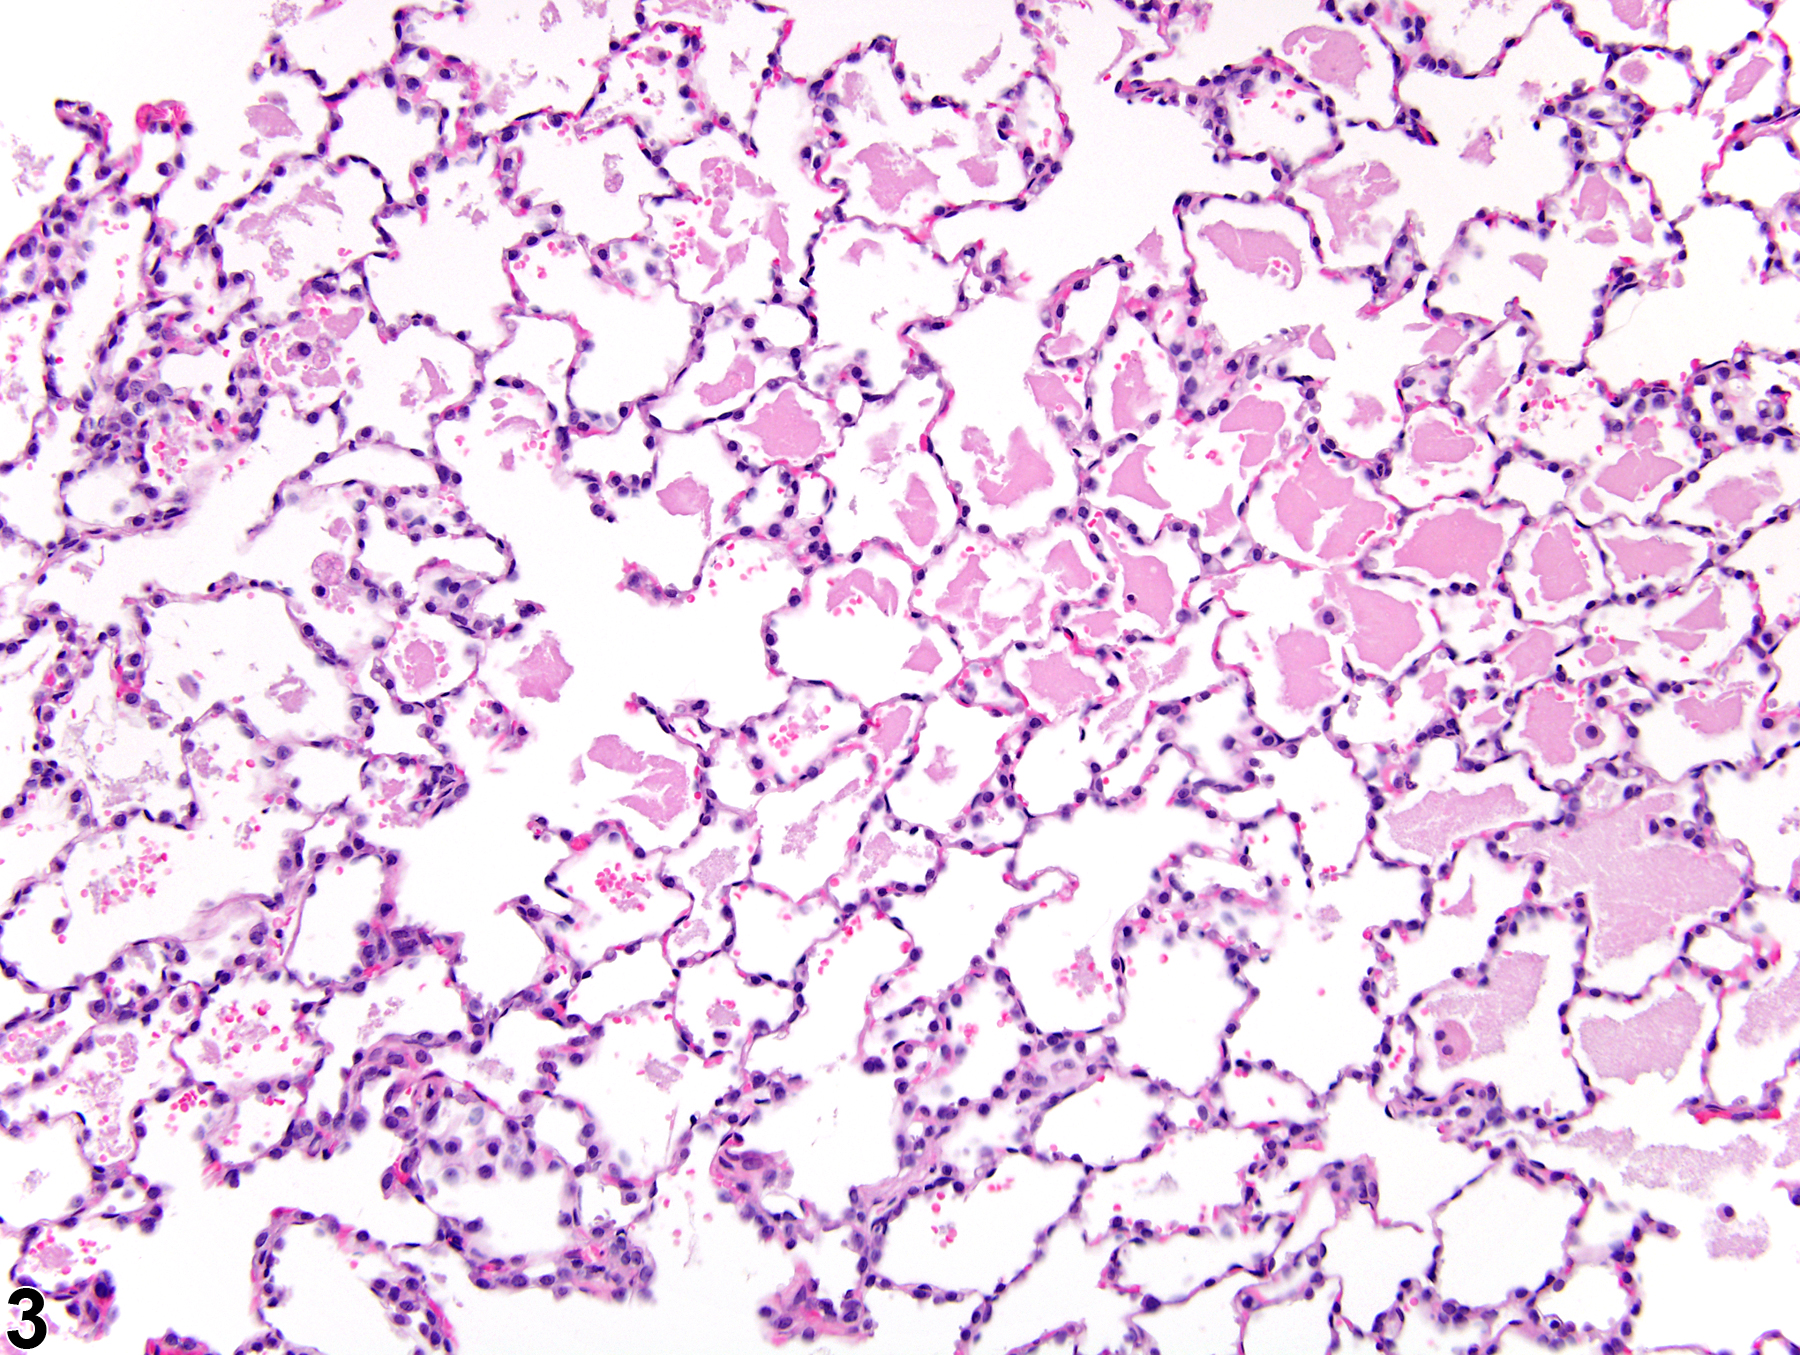 Image of alveolar proteinosis in the lung from a male F344/N rat in a subchronic study